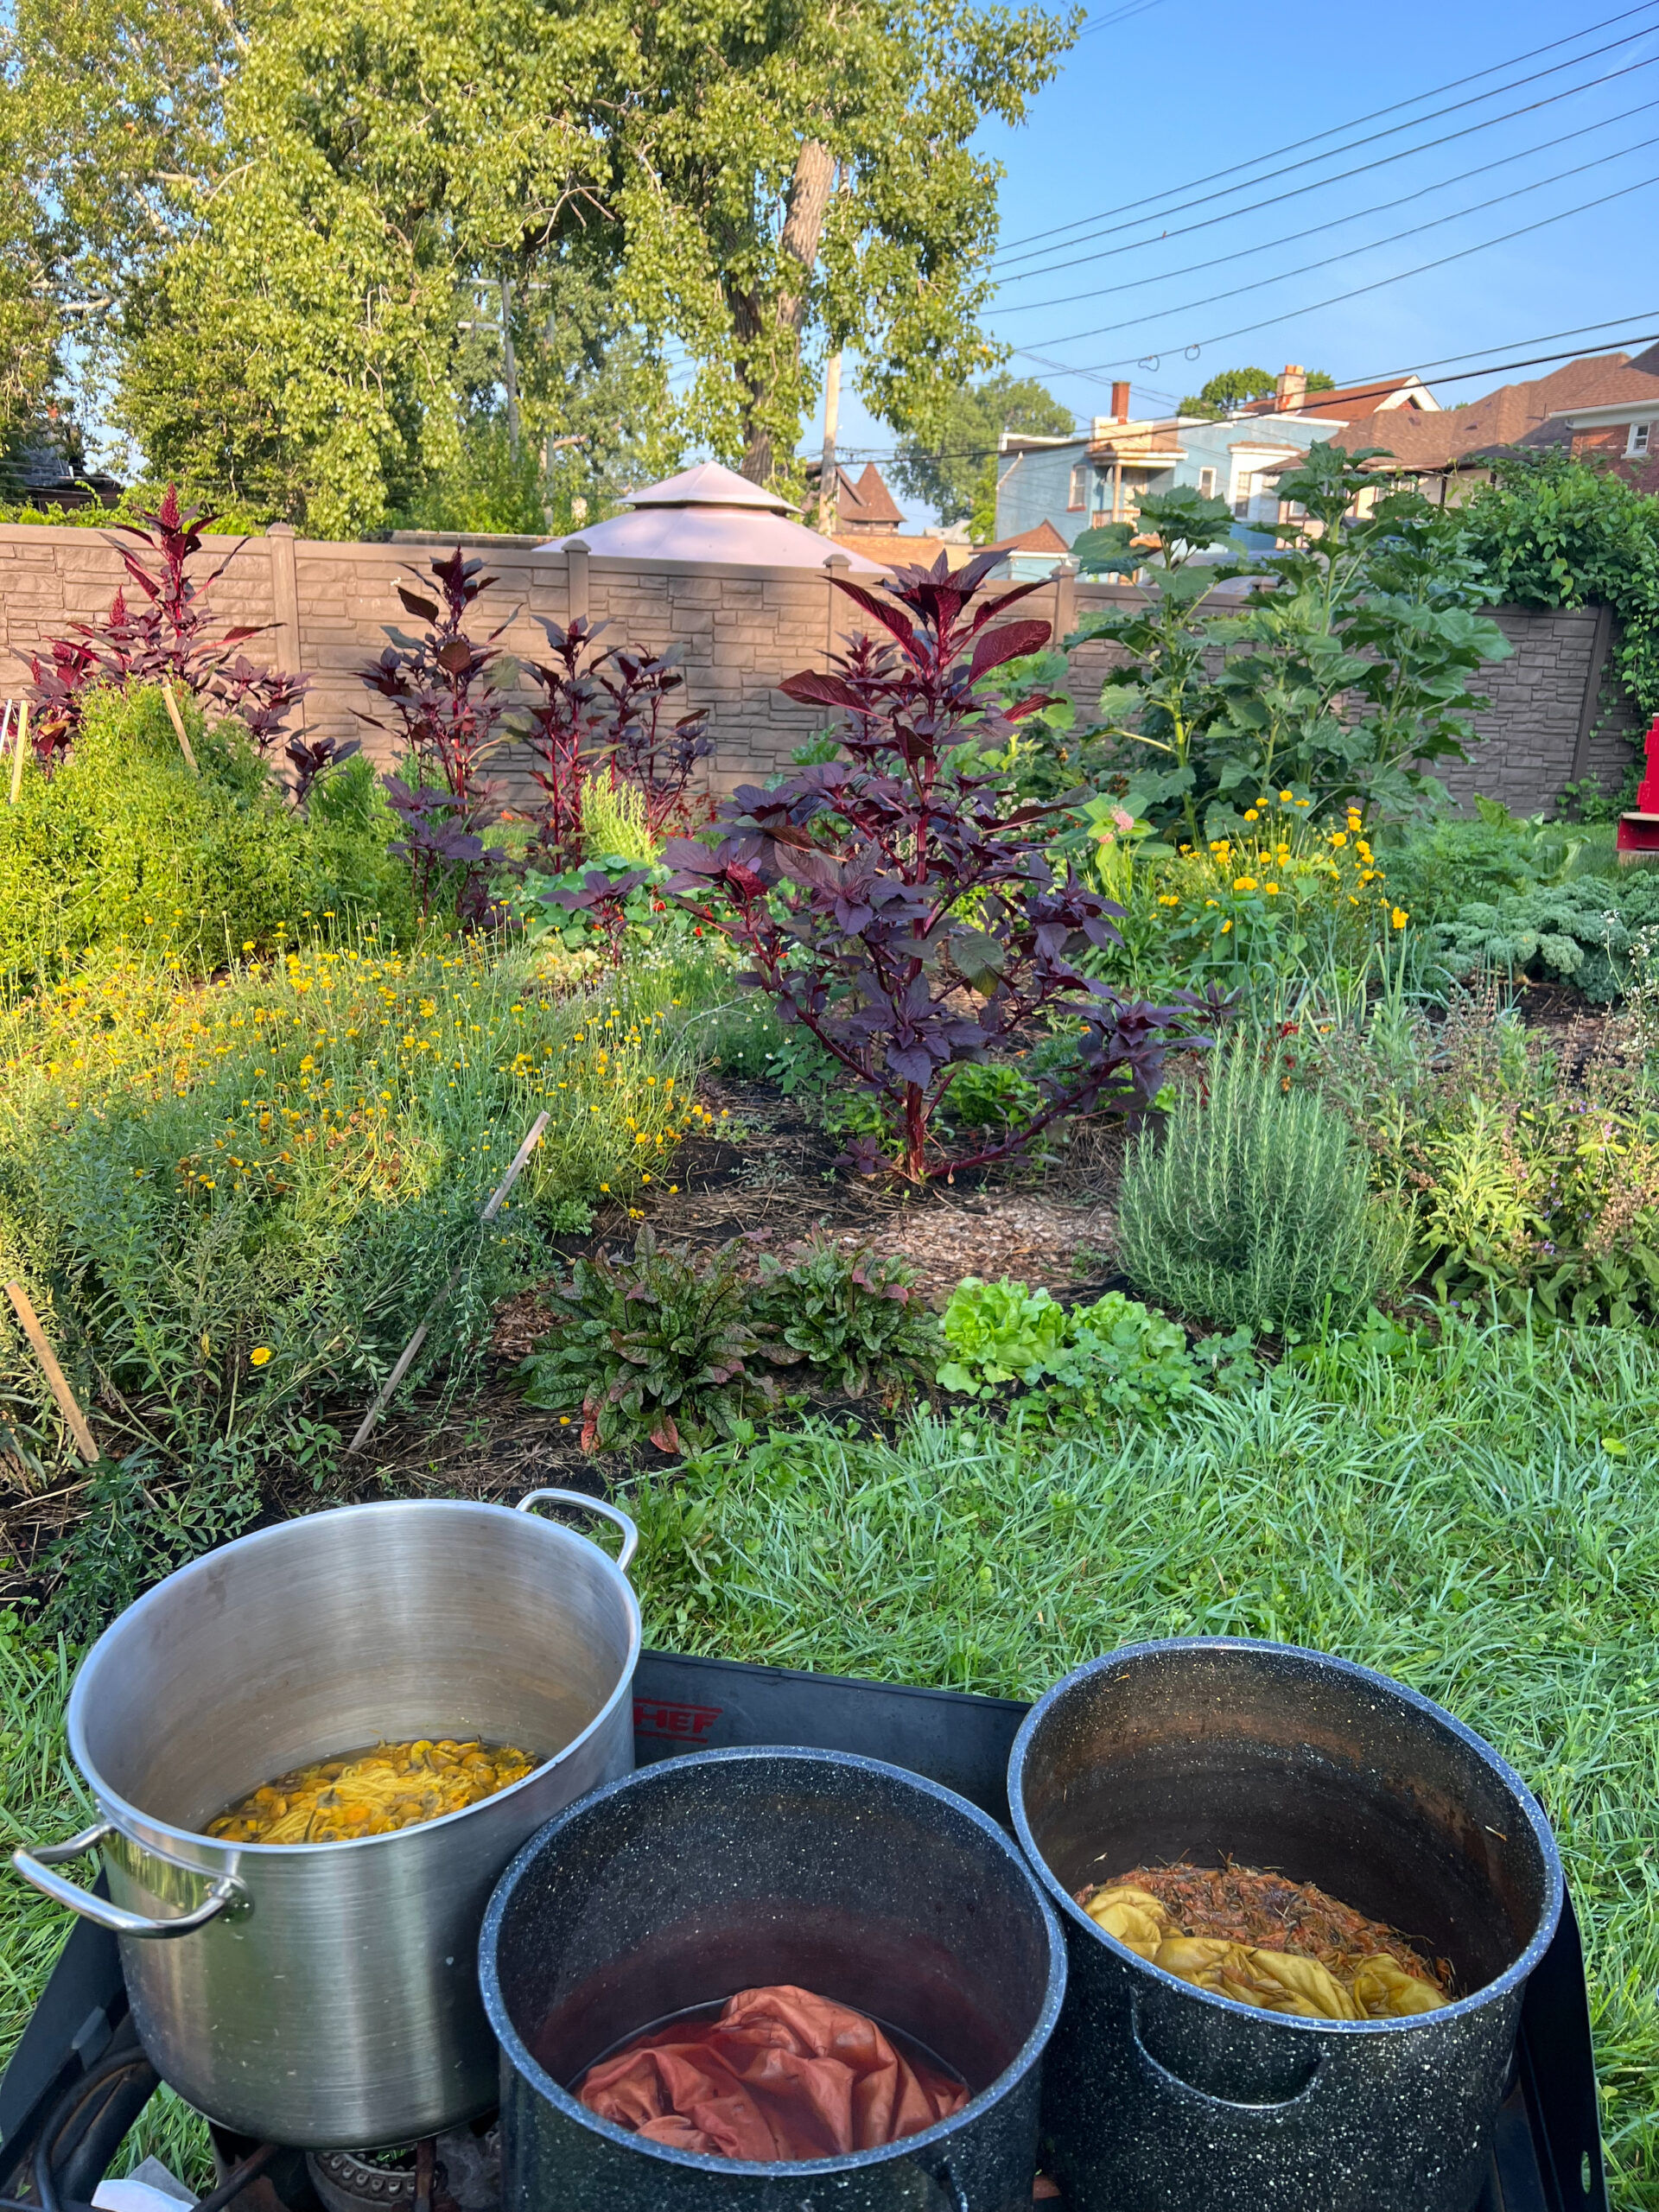 A small plot growing a garden full of plants and flowers. There are three large cooking pots beside the garden that are extracting natural pigment from flowers and plants for dyeing fabric.